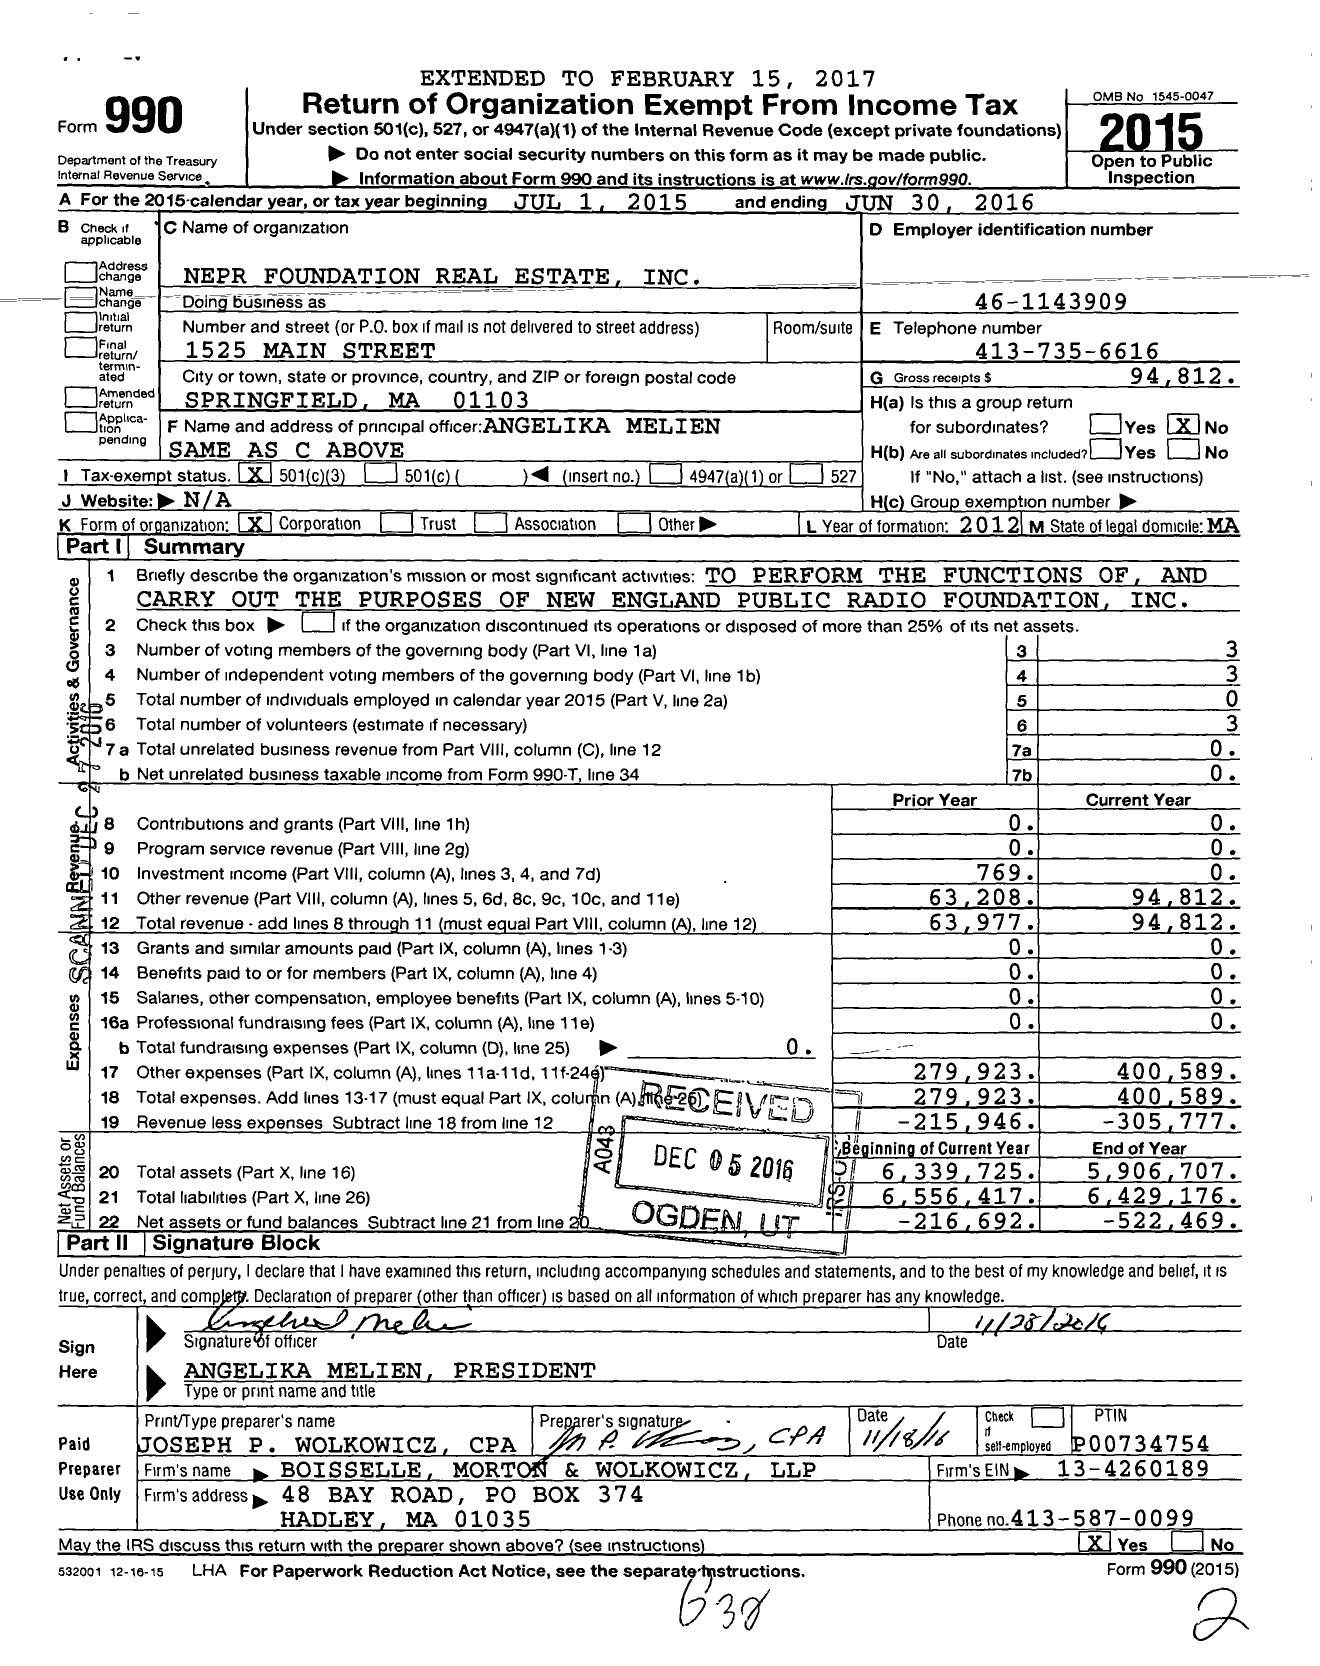 Image of first page of 2015 Form 990 for Nepr Foundation Real Estate